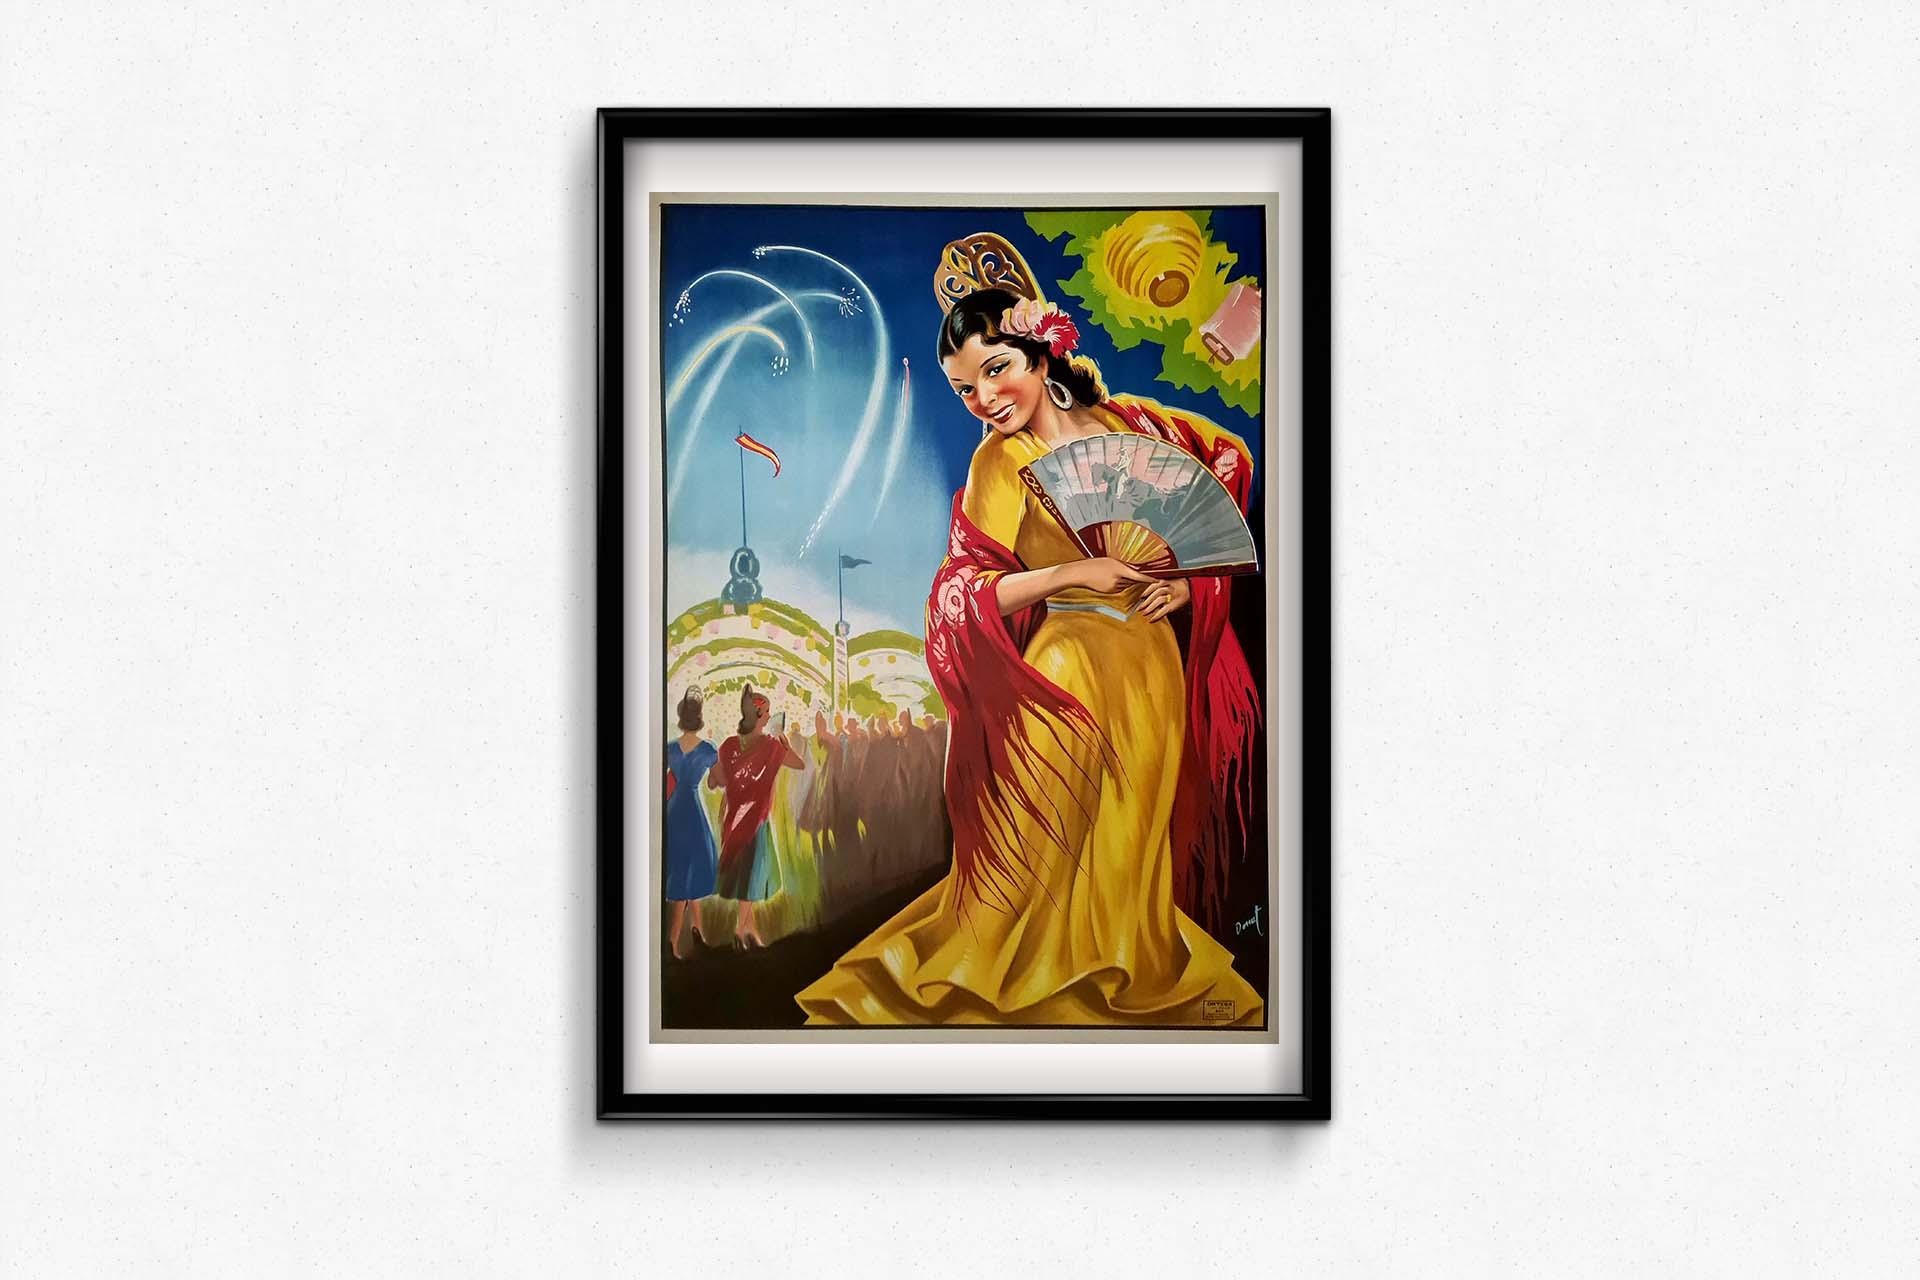 1947 original poster by Fiestas Mujer Andaluza embodies the vibrant spirit of Andalusian culture and celebration. This artwork serves as a visual invitation to immerse oneself in the rich traditions and festivities of the region.
The poster, created